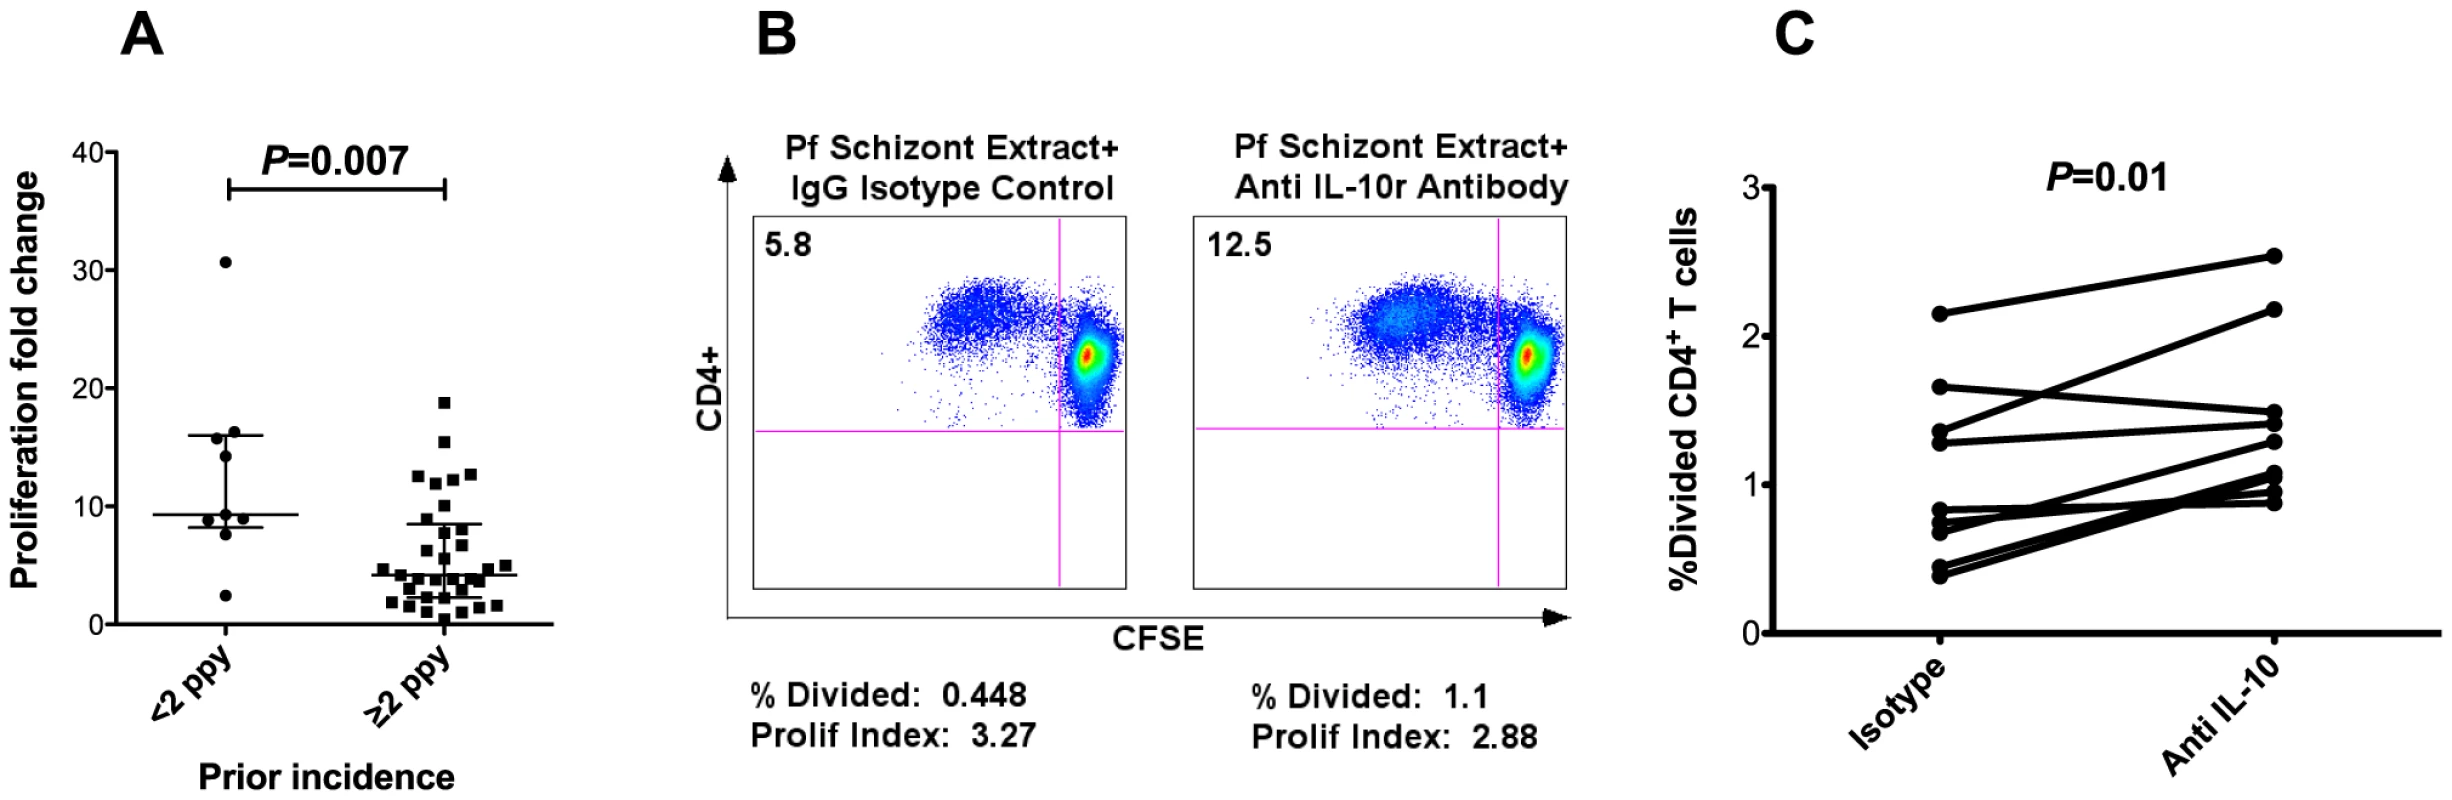 CD4<sup>+</sup> T cell proliferation impaired in setting of heavy prior exposure.